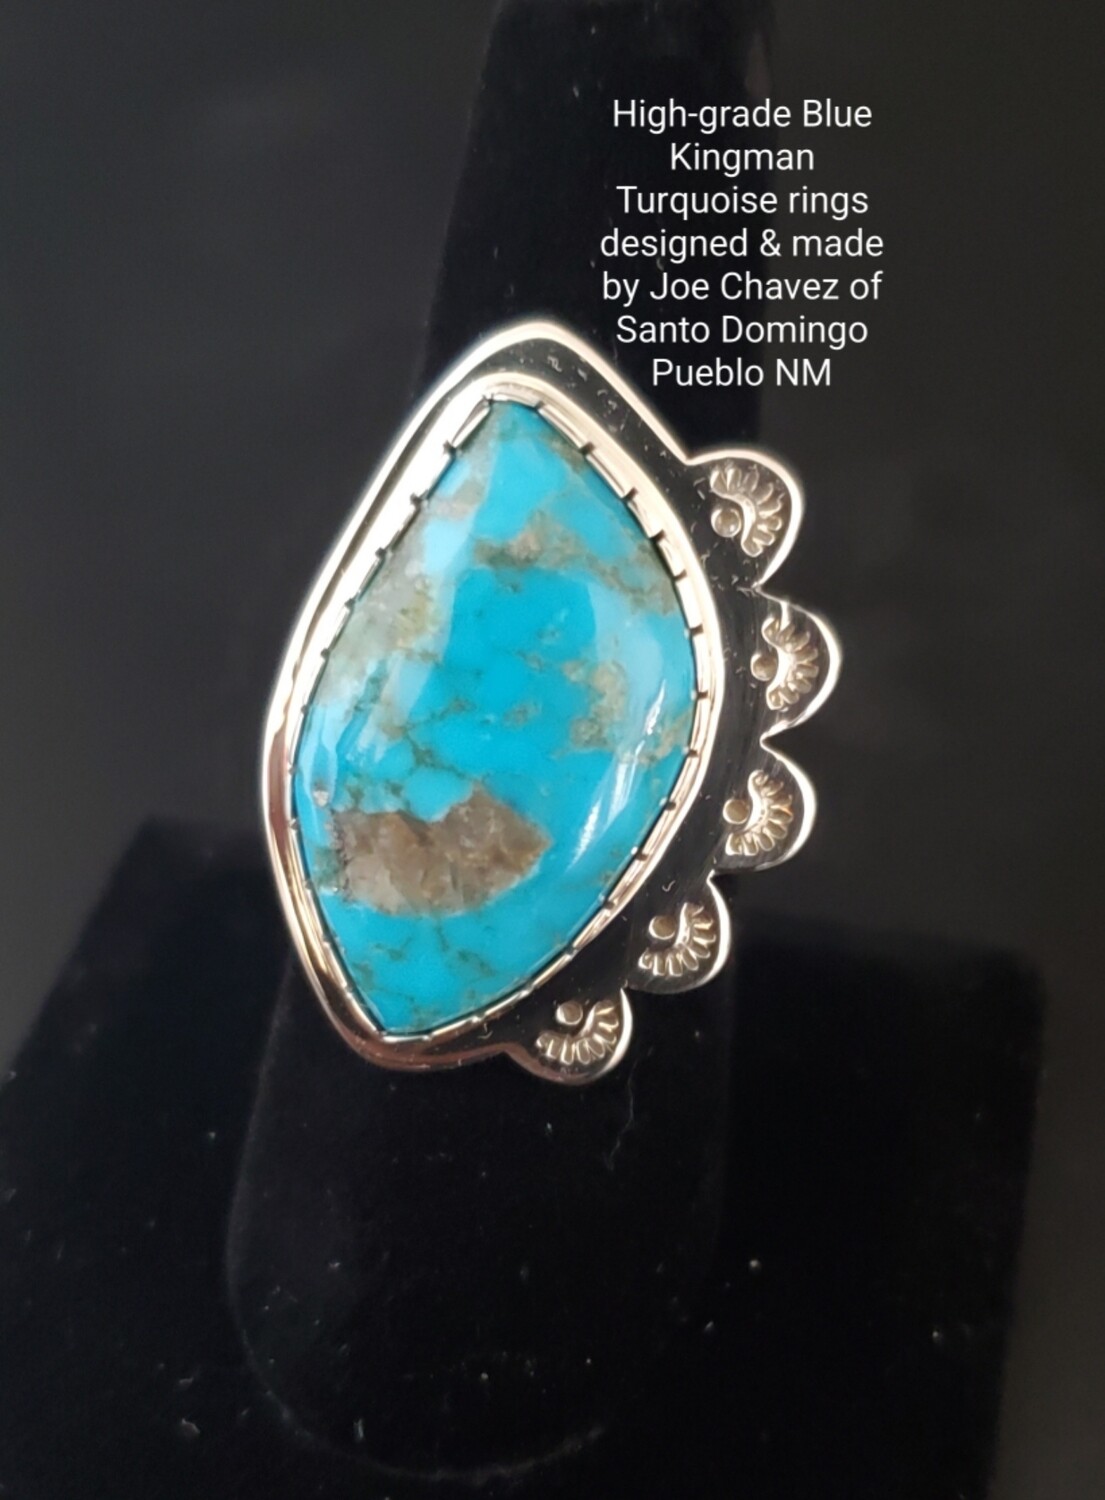 Sterling silver ring with High-grade blue Kingman turquoise